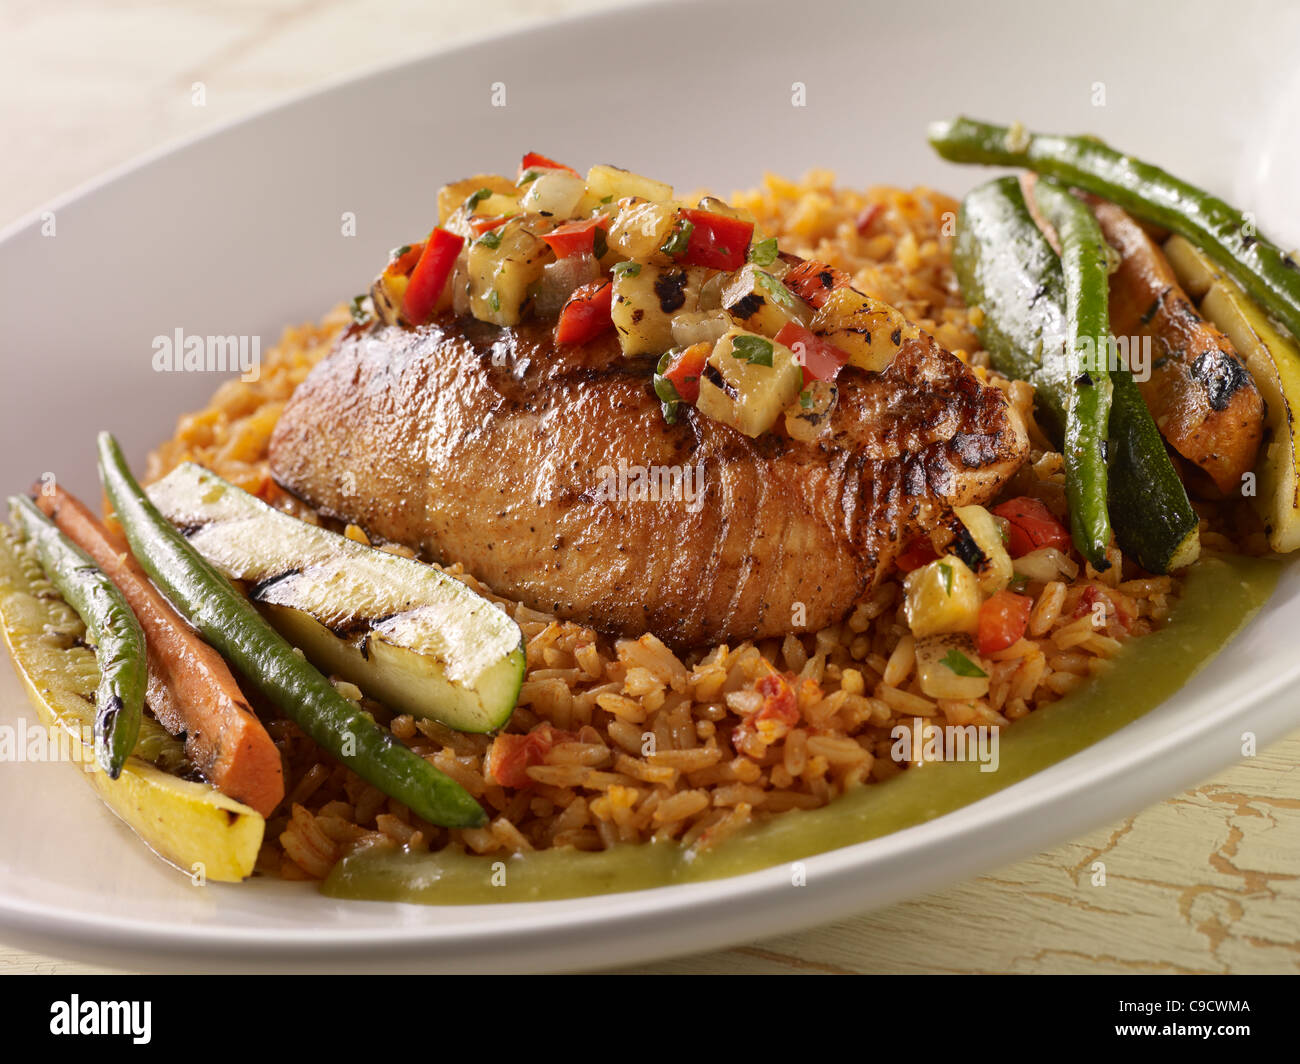 A salmon fillet topped with salsa and served over Spanish rice with grilled vegetables in a white bowl Stock Photo